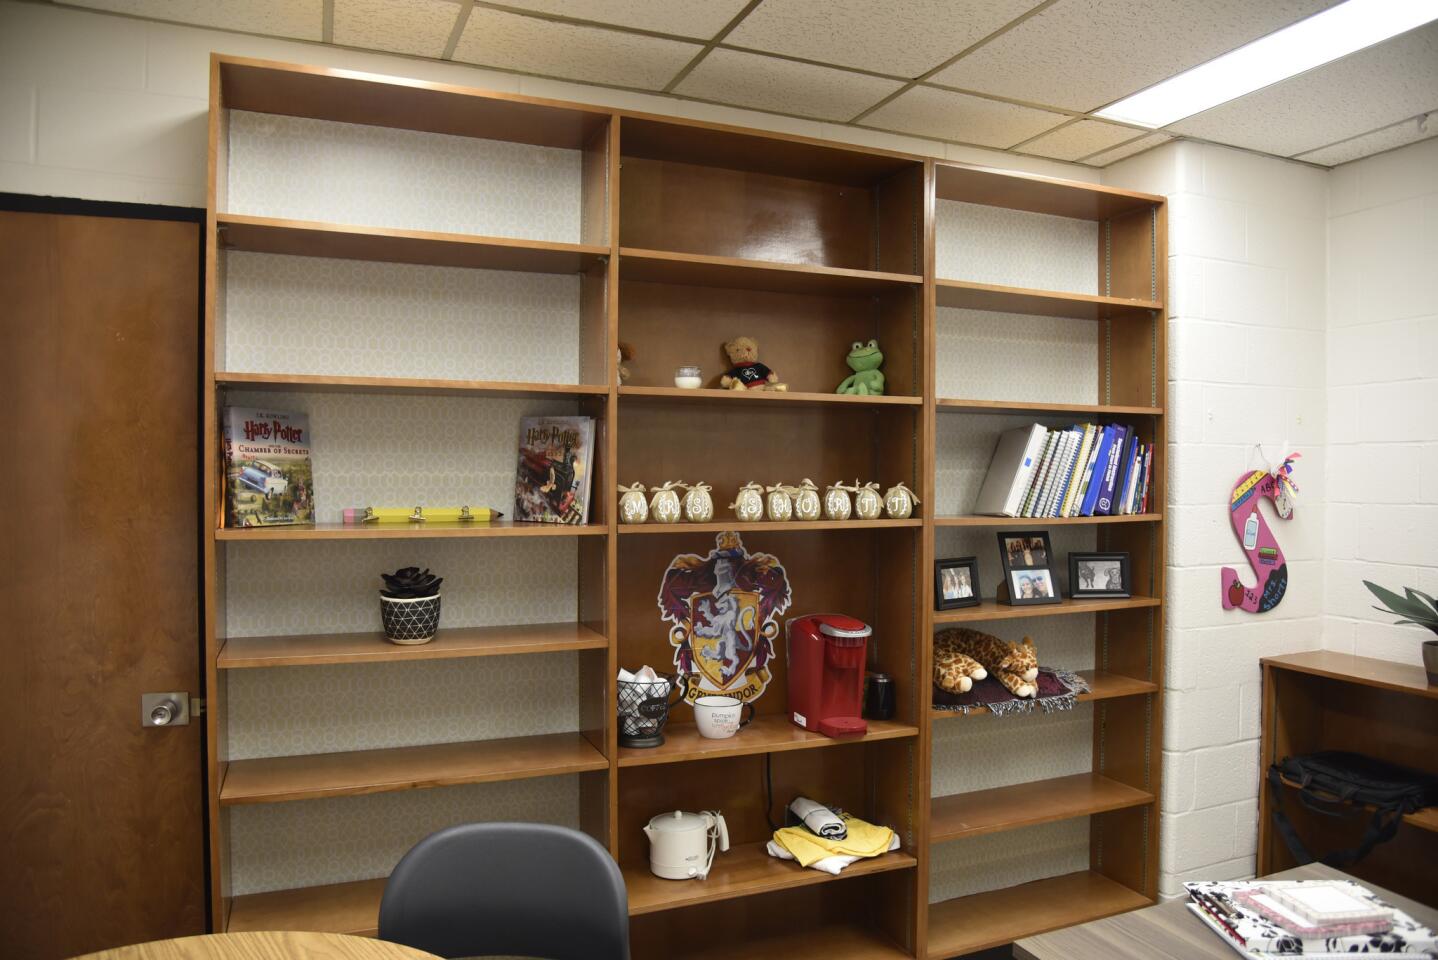 Lisa Shorrt, a new assistant principal at Hillcrest Elementary School, keeps coffee and Harry Potter memorabilia among her office supplies.